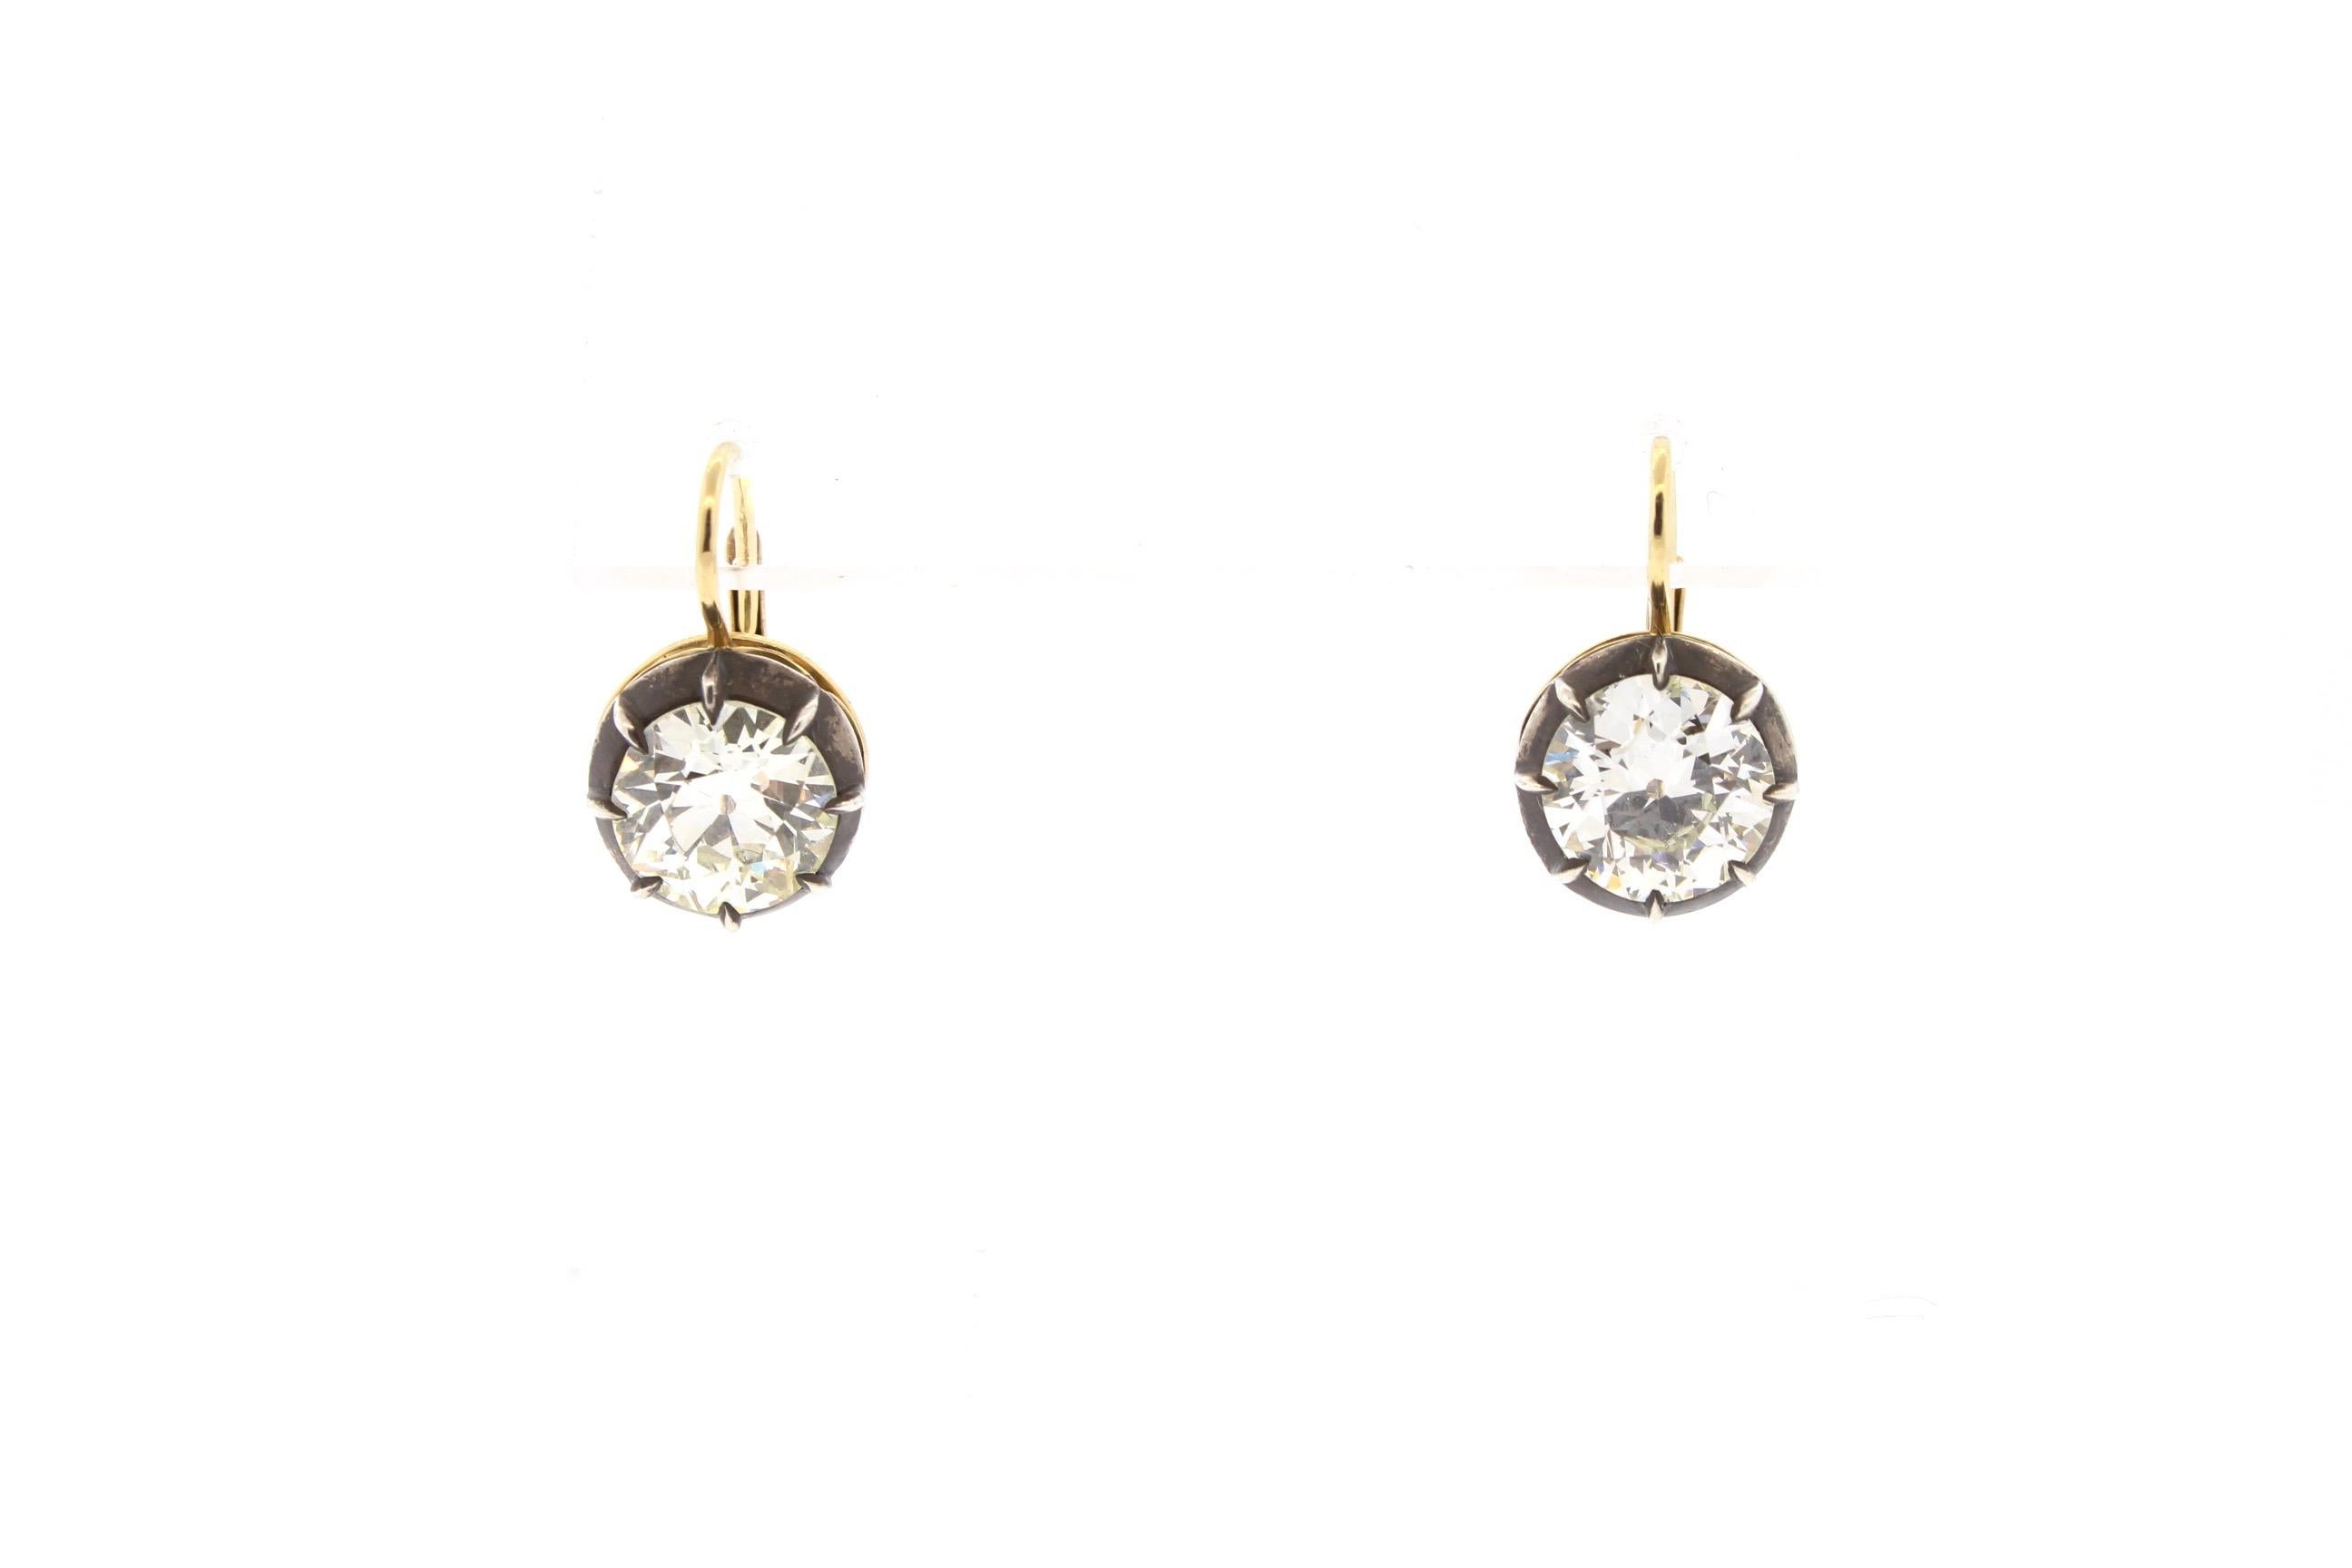 Single stone Old European cut diamond earrings weighing 2.46 ct and 2.55 ct set in silver topped gold collet settings. These earrings were made in our workshop in 18k gold and have an oxidized collet setting. The diamonds are antique, perfectly